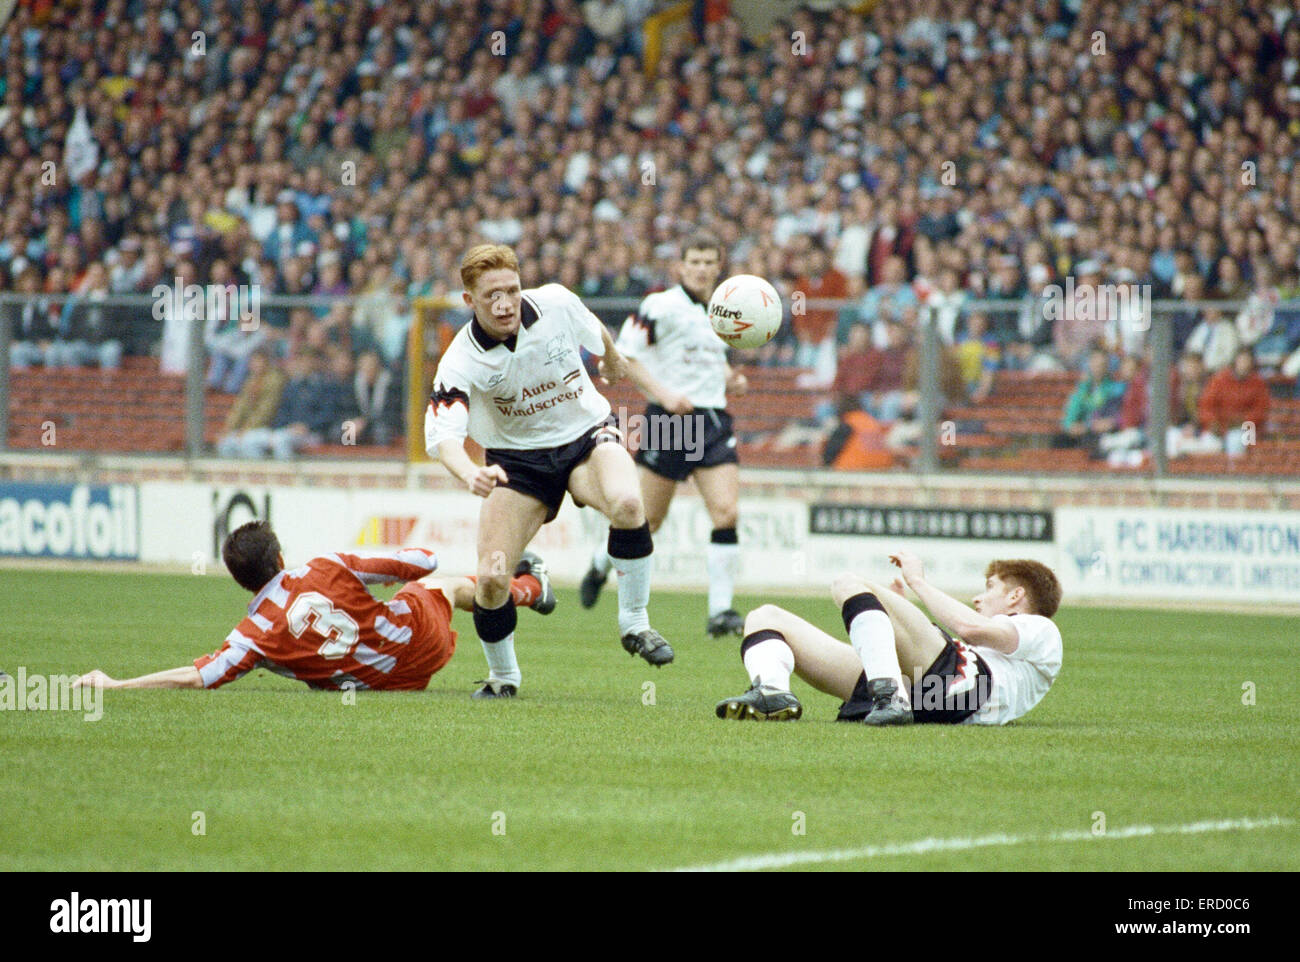 Anglo Italian Cup Final at Wembley Stadium. Derby County  1 v Cremonese 3. Tommy Johnson lies grounded and Shane Nicholson looks on as Mark Pembridge does battle in midfield. 27th March 1993. Stock Photo